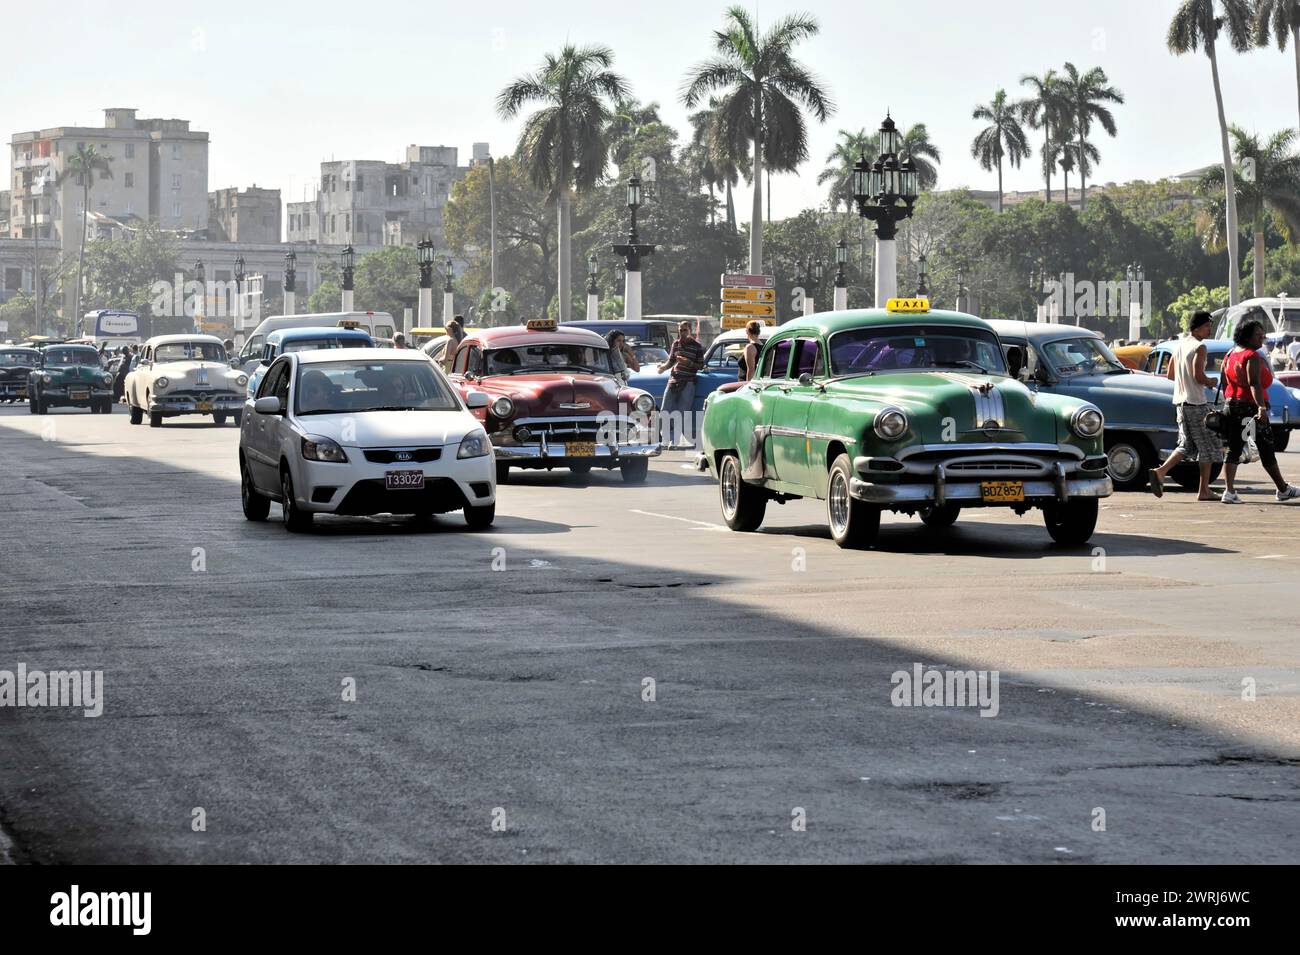 A city street with a mix of vintage and modern cars by day, Havana, Cuba, Central America Stock Photo